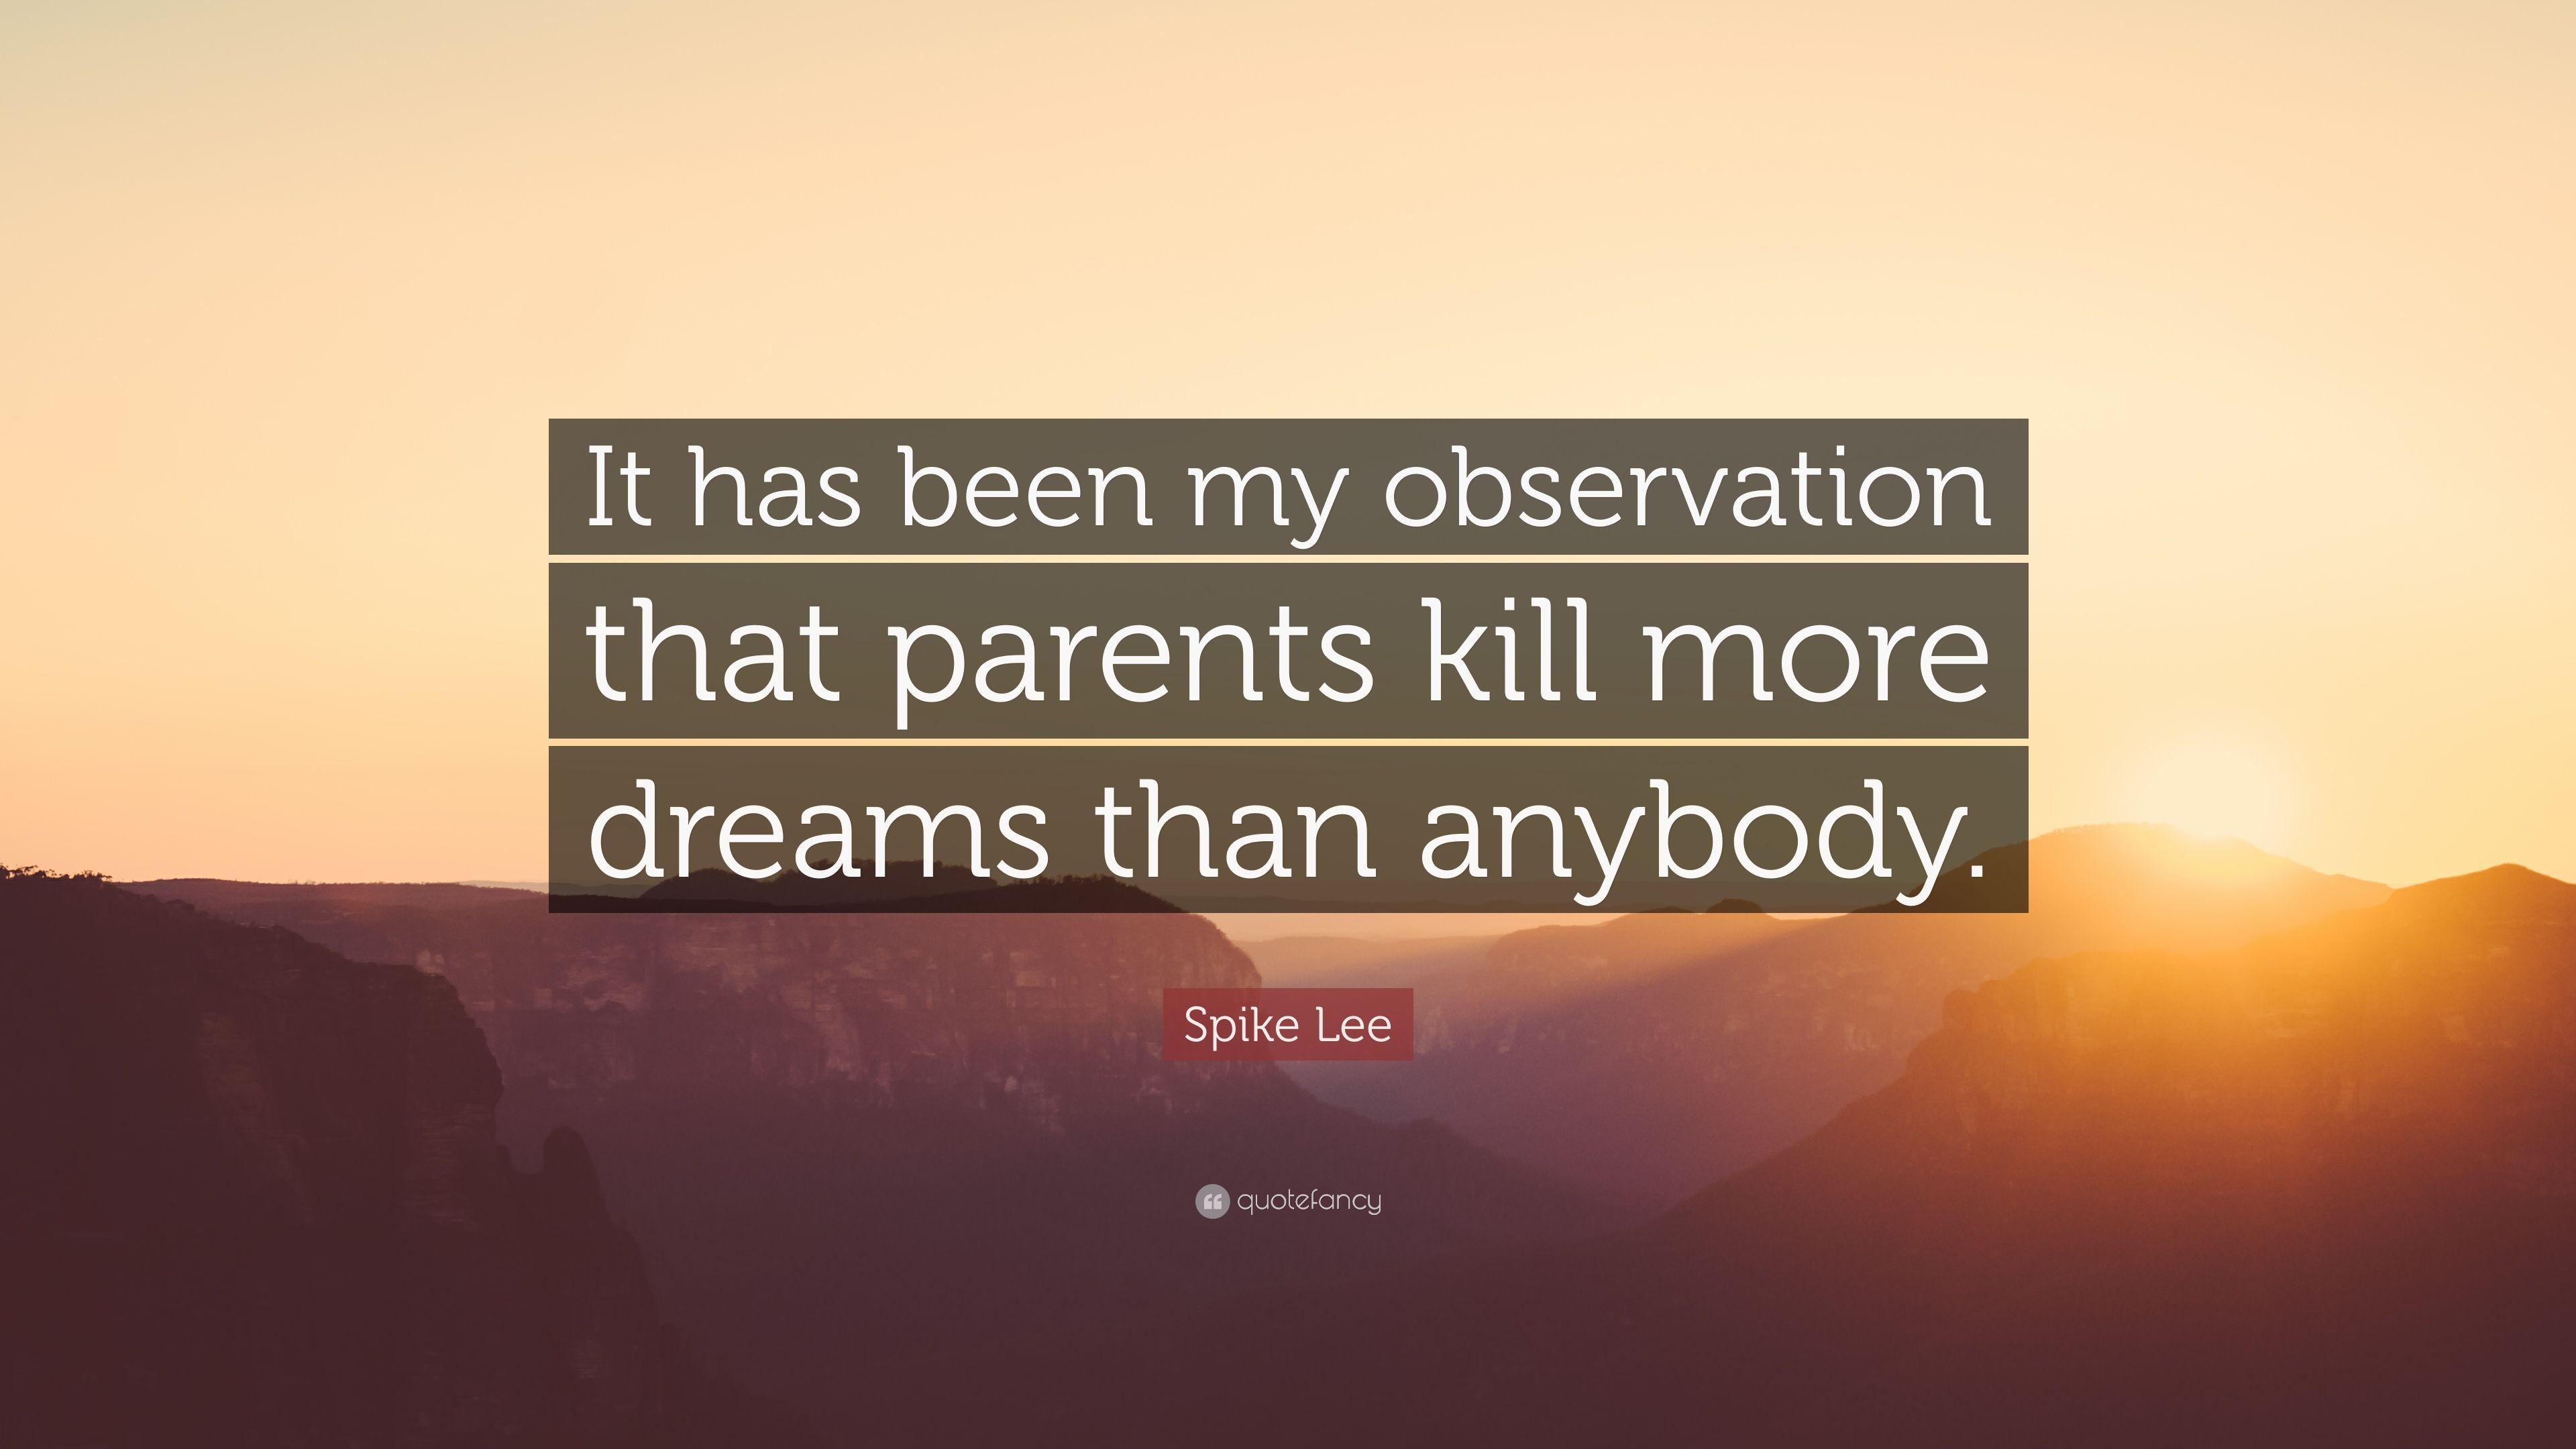 Spike Lee Quote: “It has been my observation that parents kill